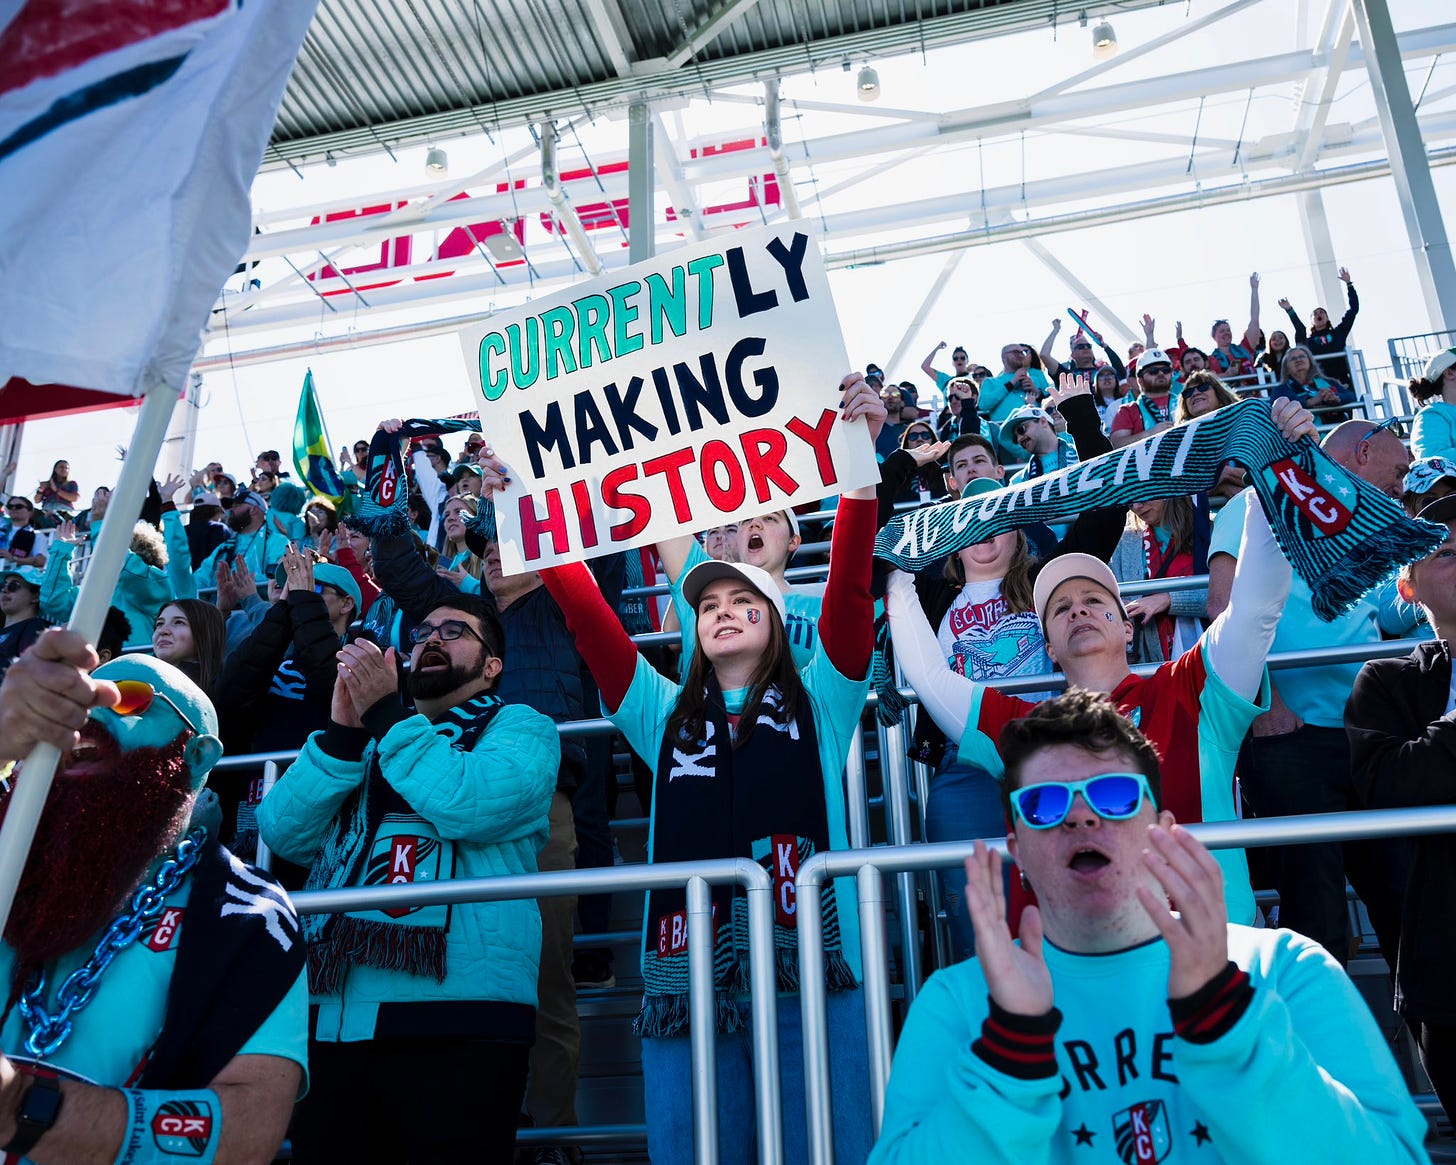 Photo of our fans with one holding up a sign that says “Currently making history”